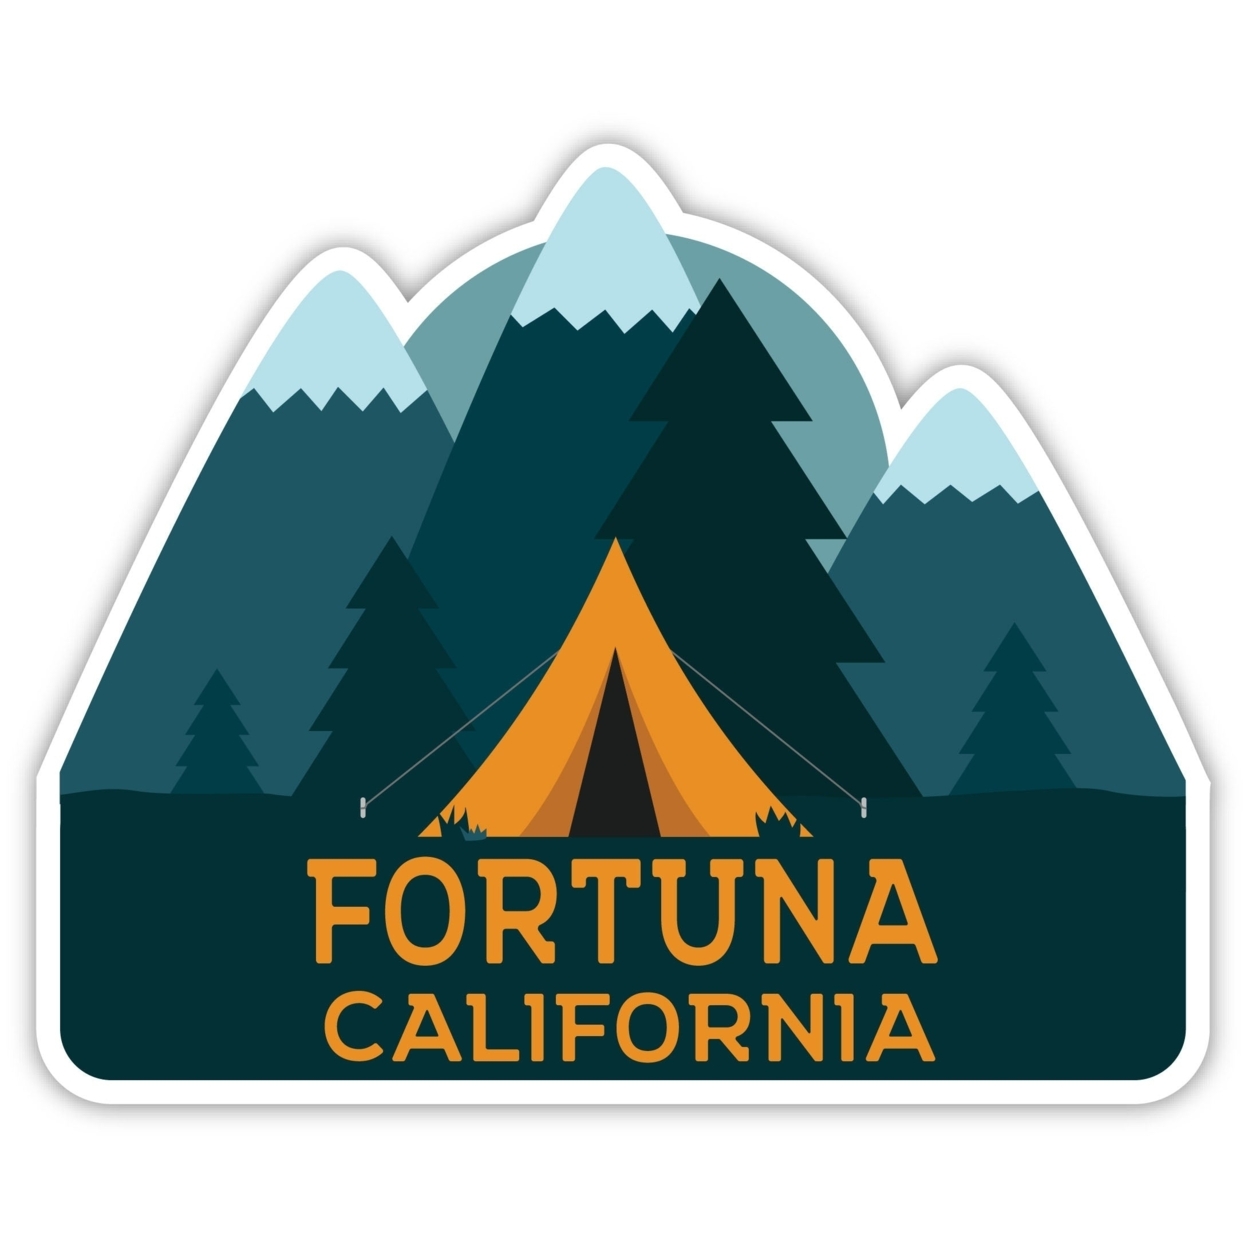 Fortuna California Souvenir Decorative Stickers (Choose Theme And Size) - 4-Pack, 2-Inch, Tent